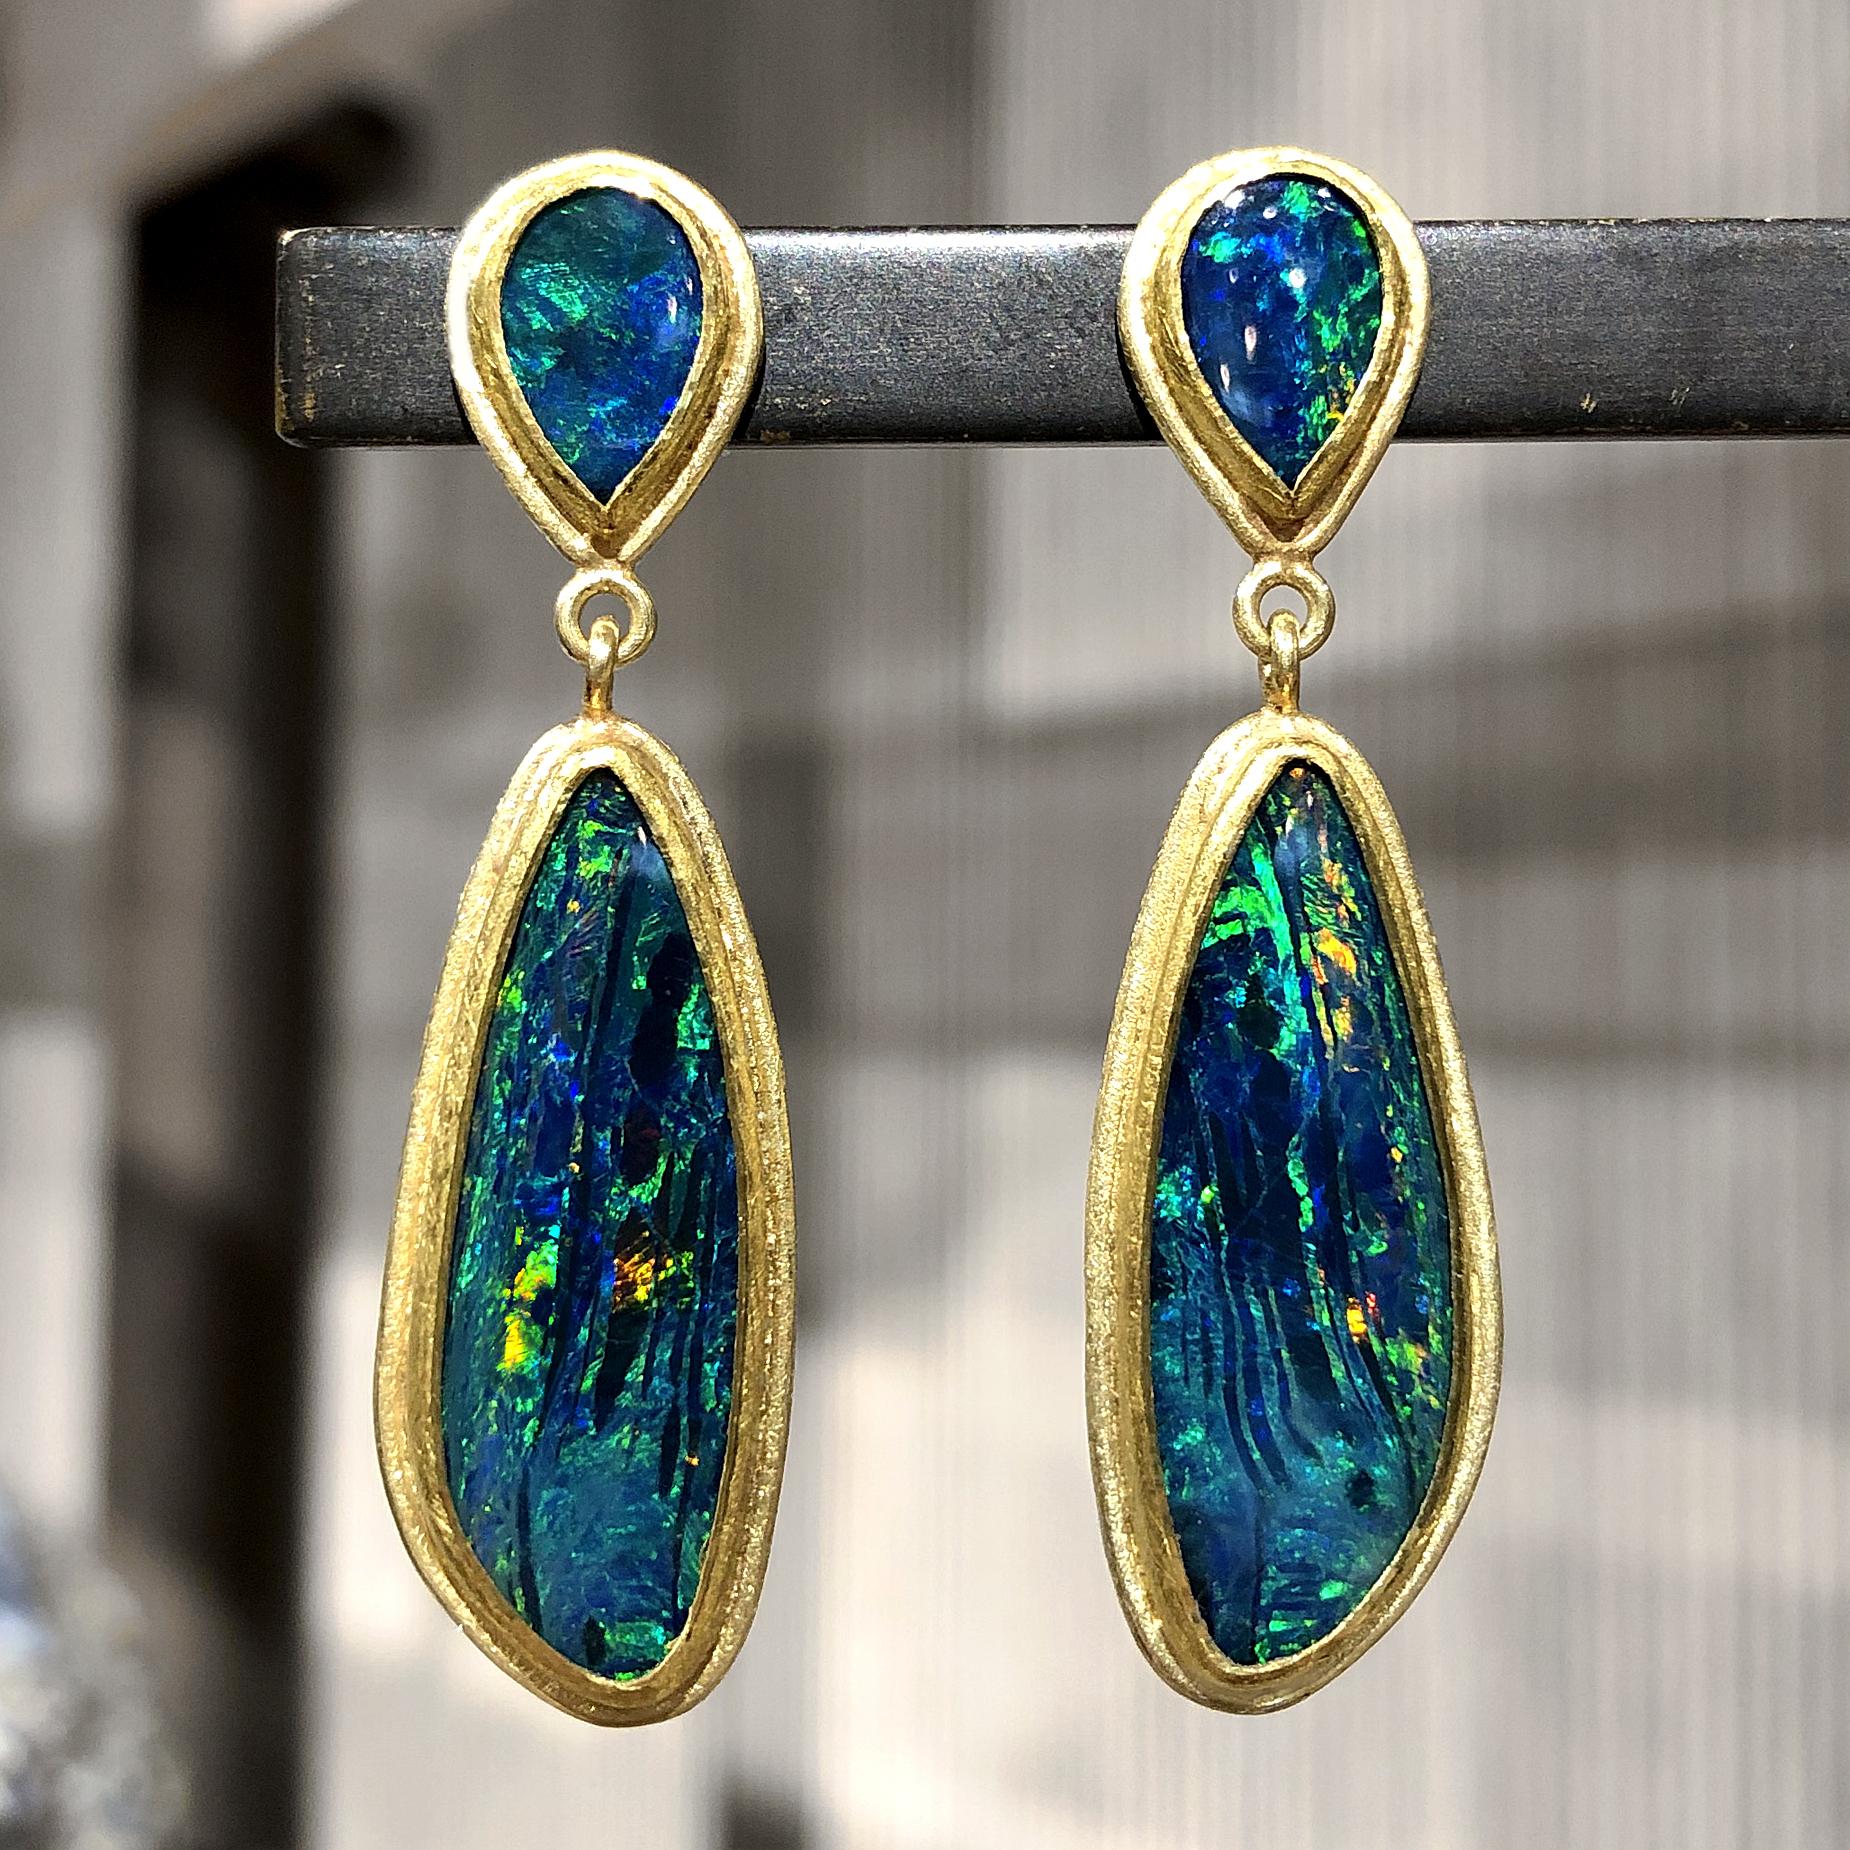 One of a Kind Dangle Drop Earrings handmade by acclaimed jewelry artist Petra Class in signature finely-textured 22k yellow gold featuring four spectacular matched deep blue Australian opal doublets, showcasing exceptional color-play with primary